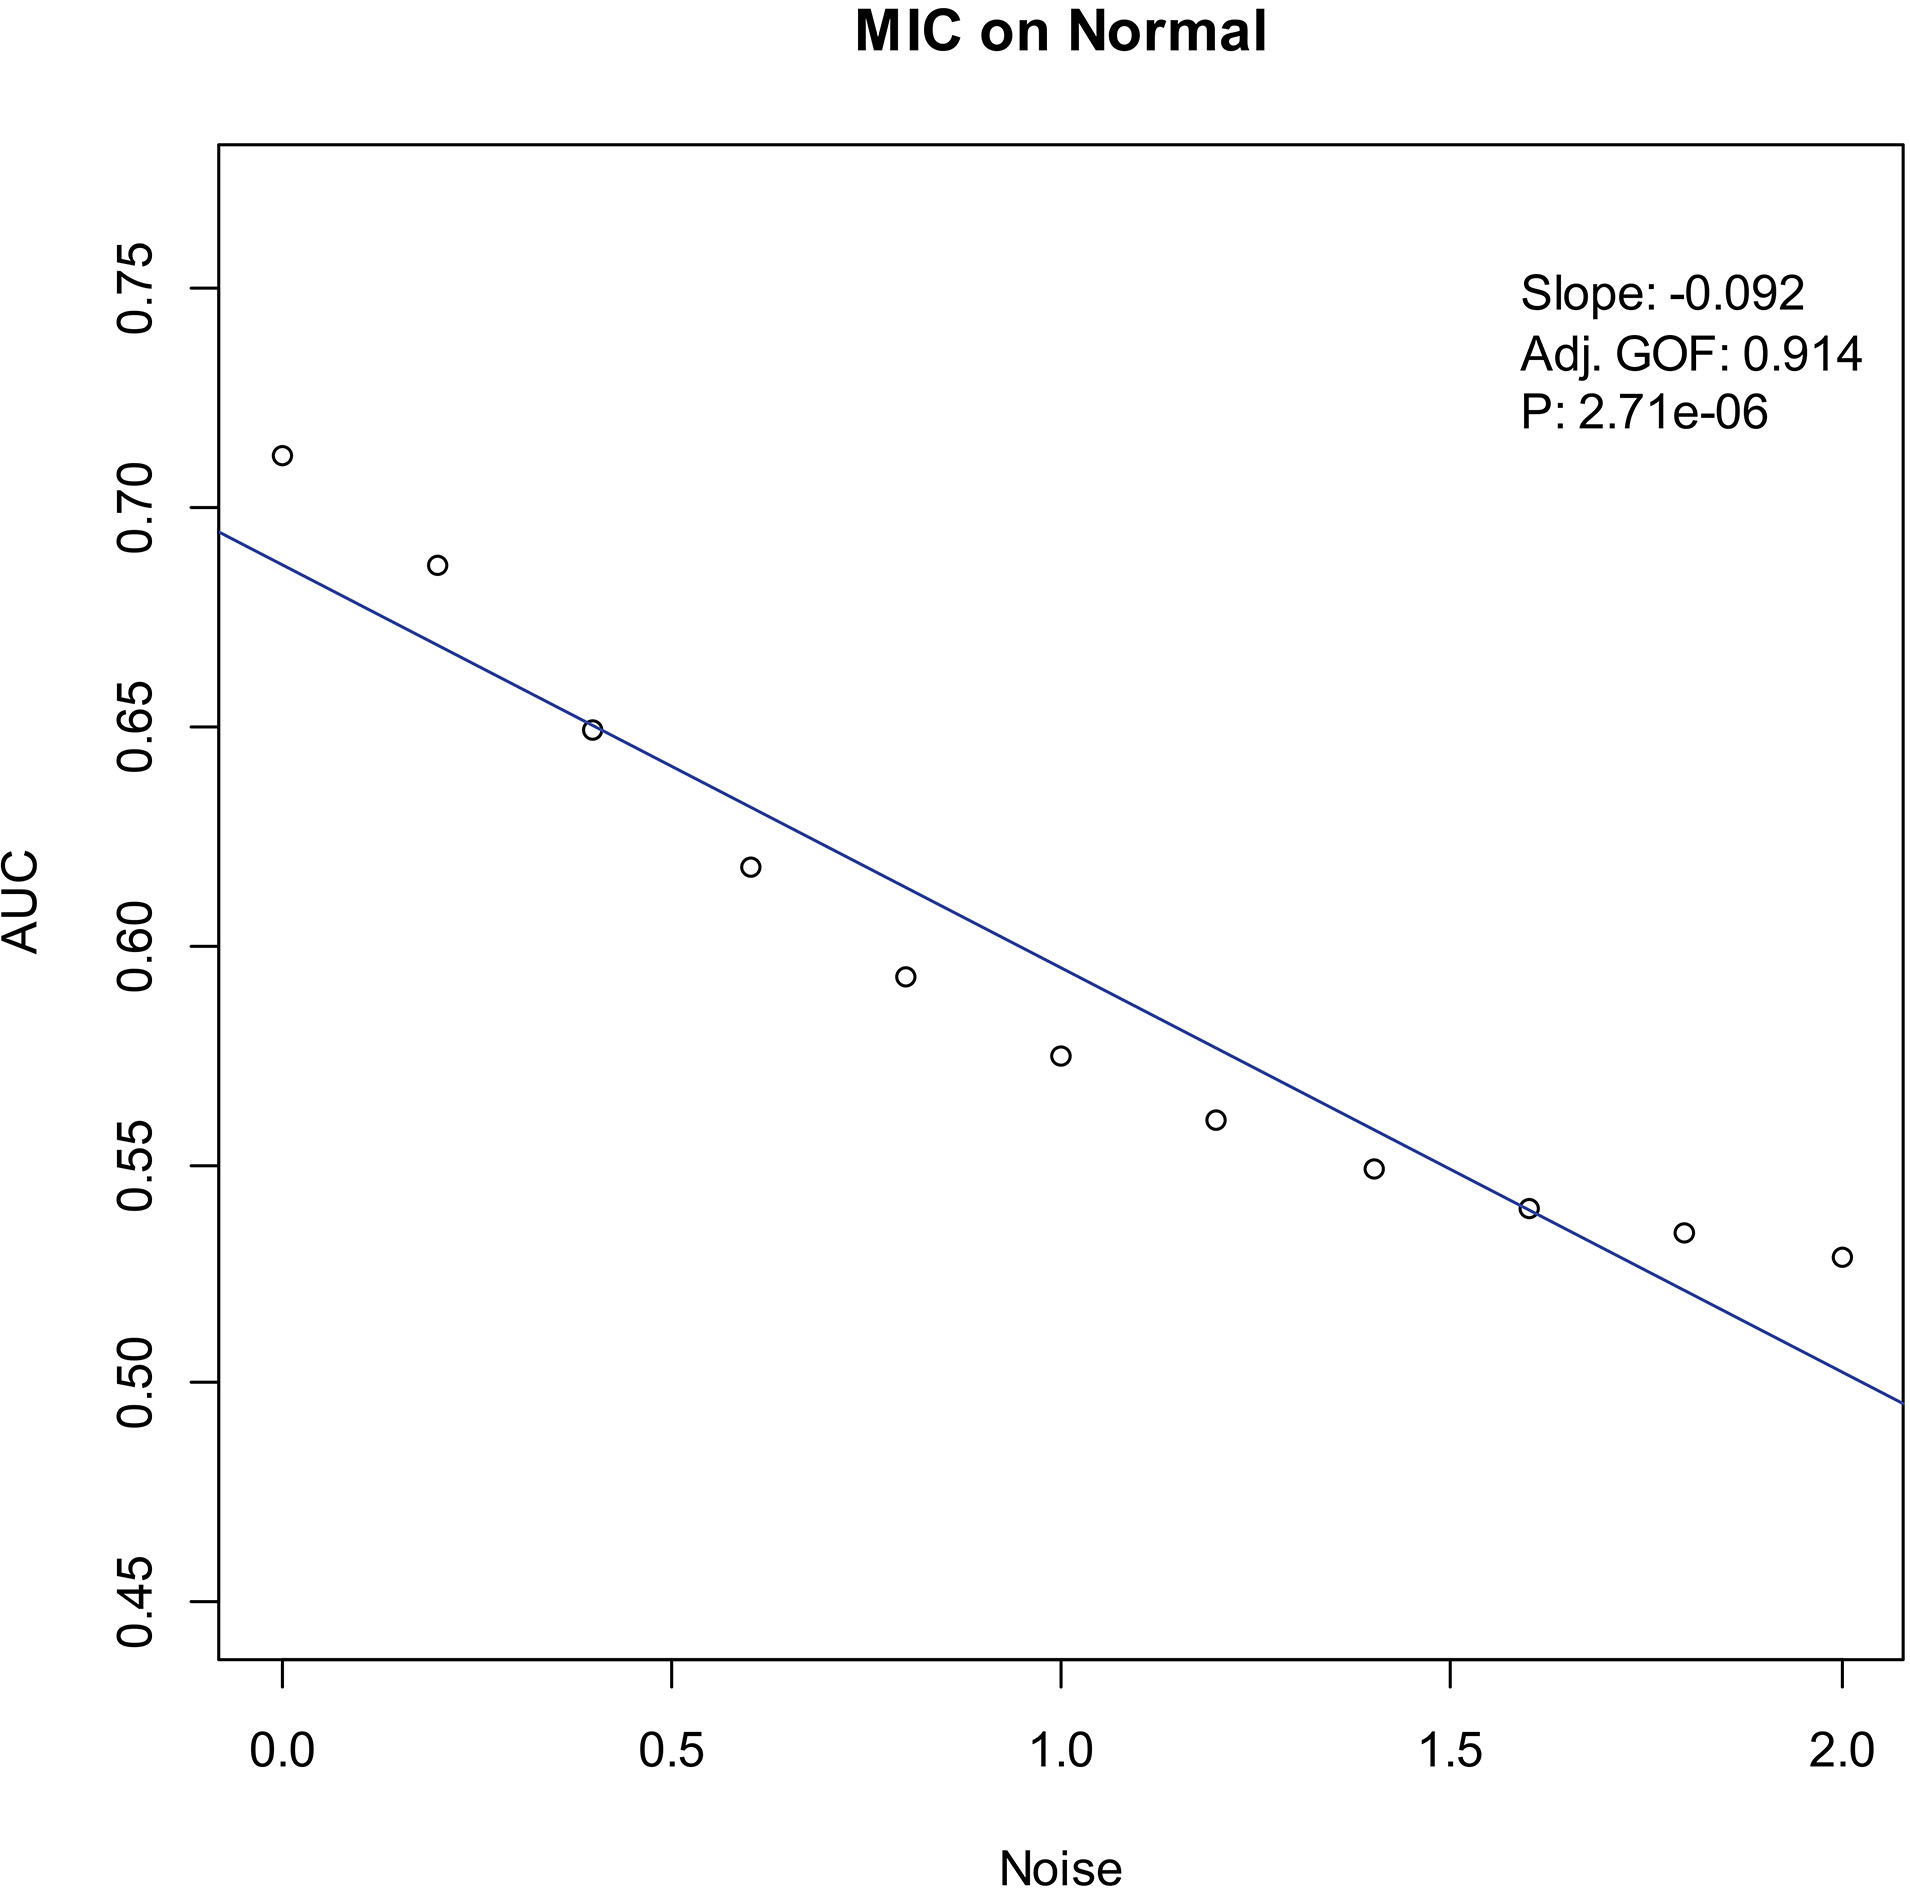 Noise-AUC plot of MIC on normal. The line is fitted by the points. “Slope” indicates the slope of the line, “Adj. GOF” is the adjusted goodness of fit, and “P” is the P-value of the fit.